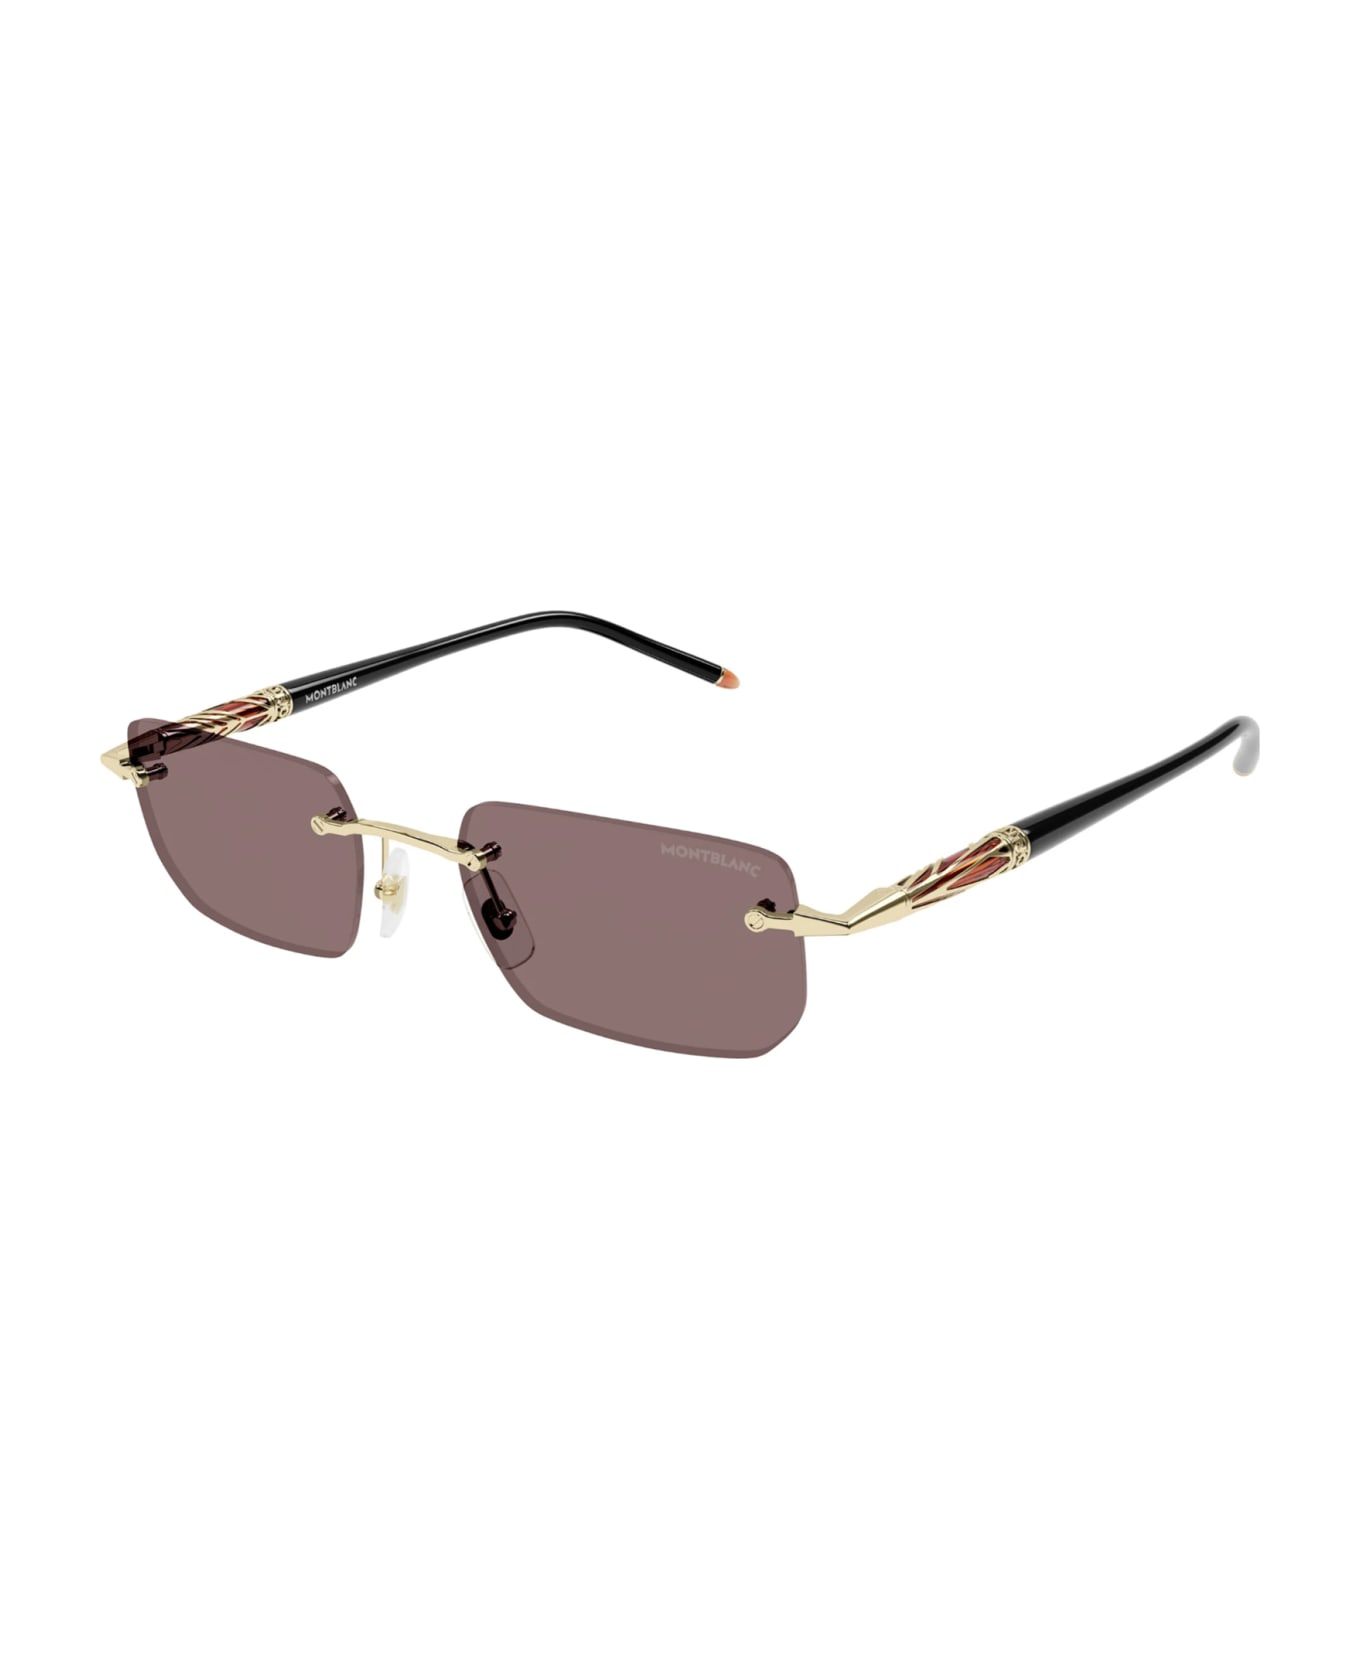 Montblanc MB0348S Sunglasses - Gold Black Brown